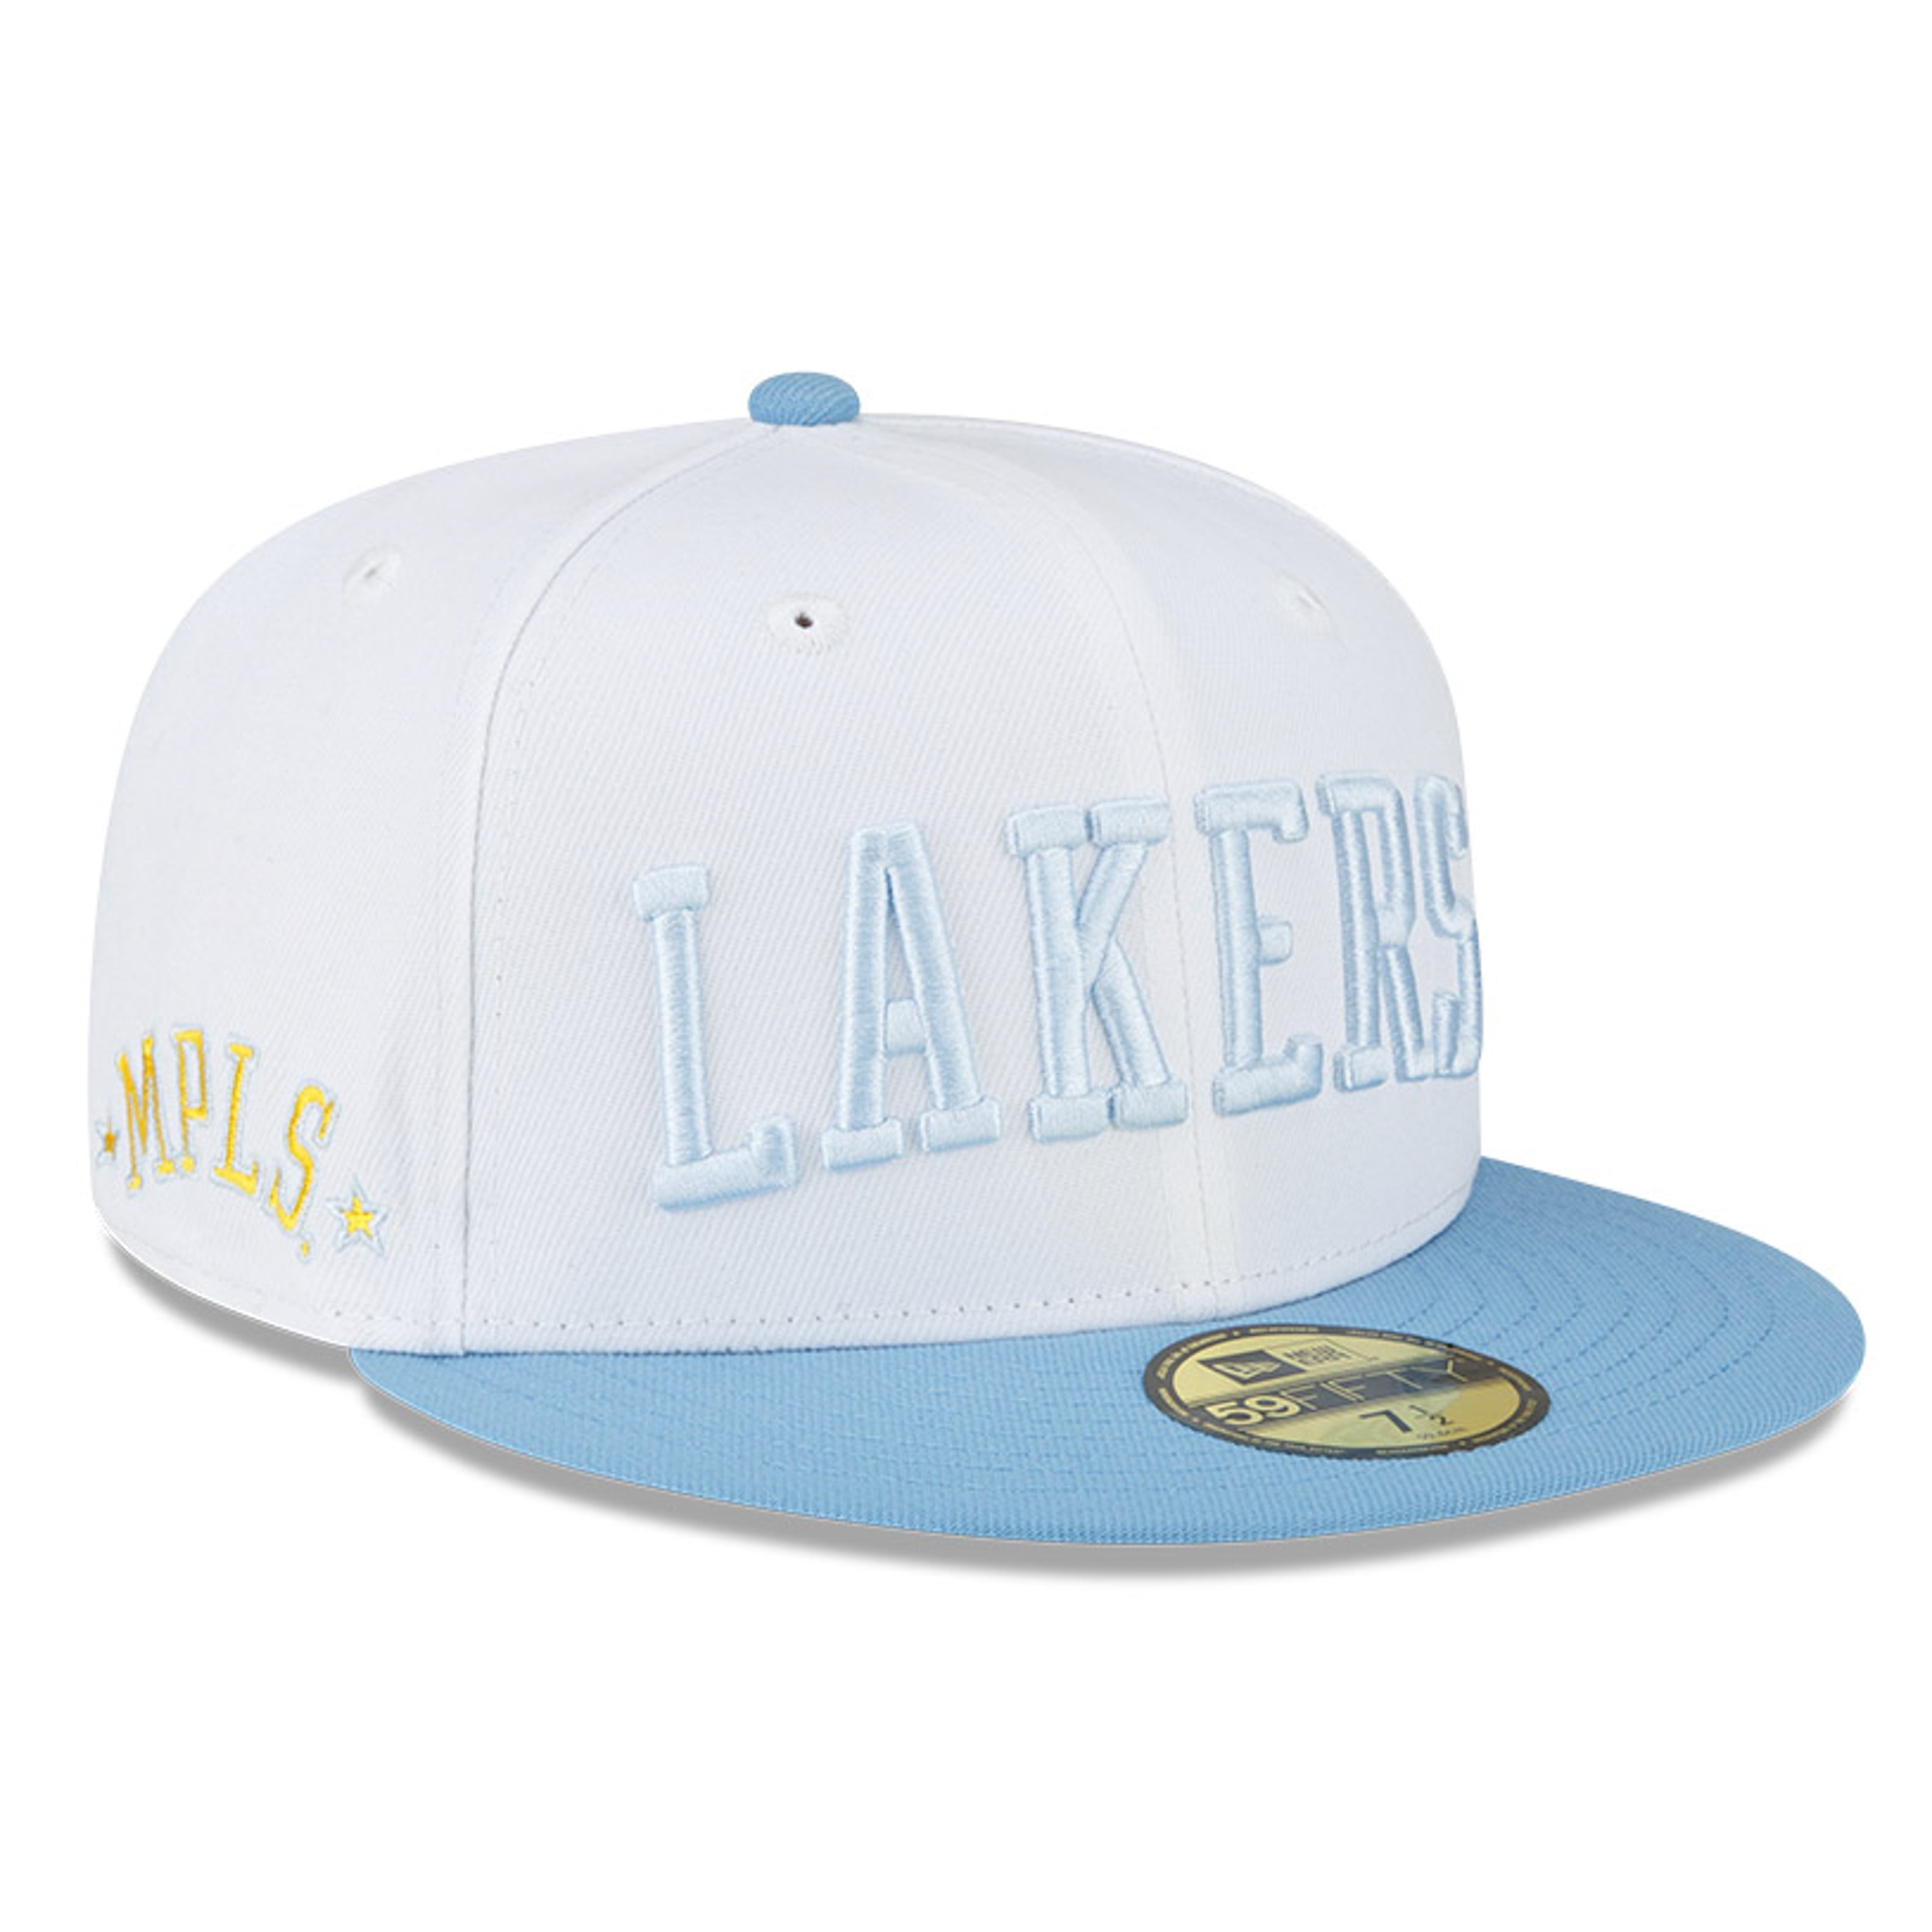 New Era Los Angeles Lakers 'Black/White' 9FORTY A-Frame Snapback Black/White - Size One